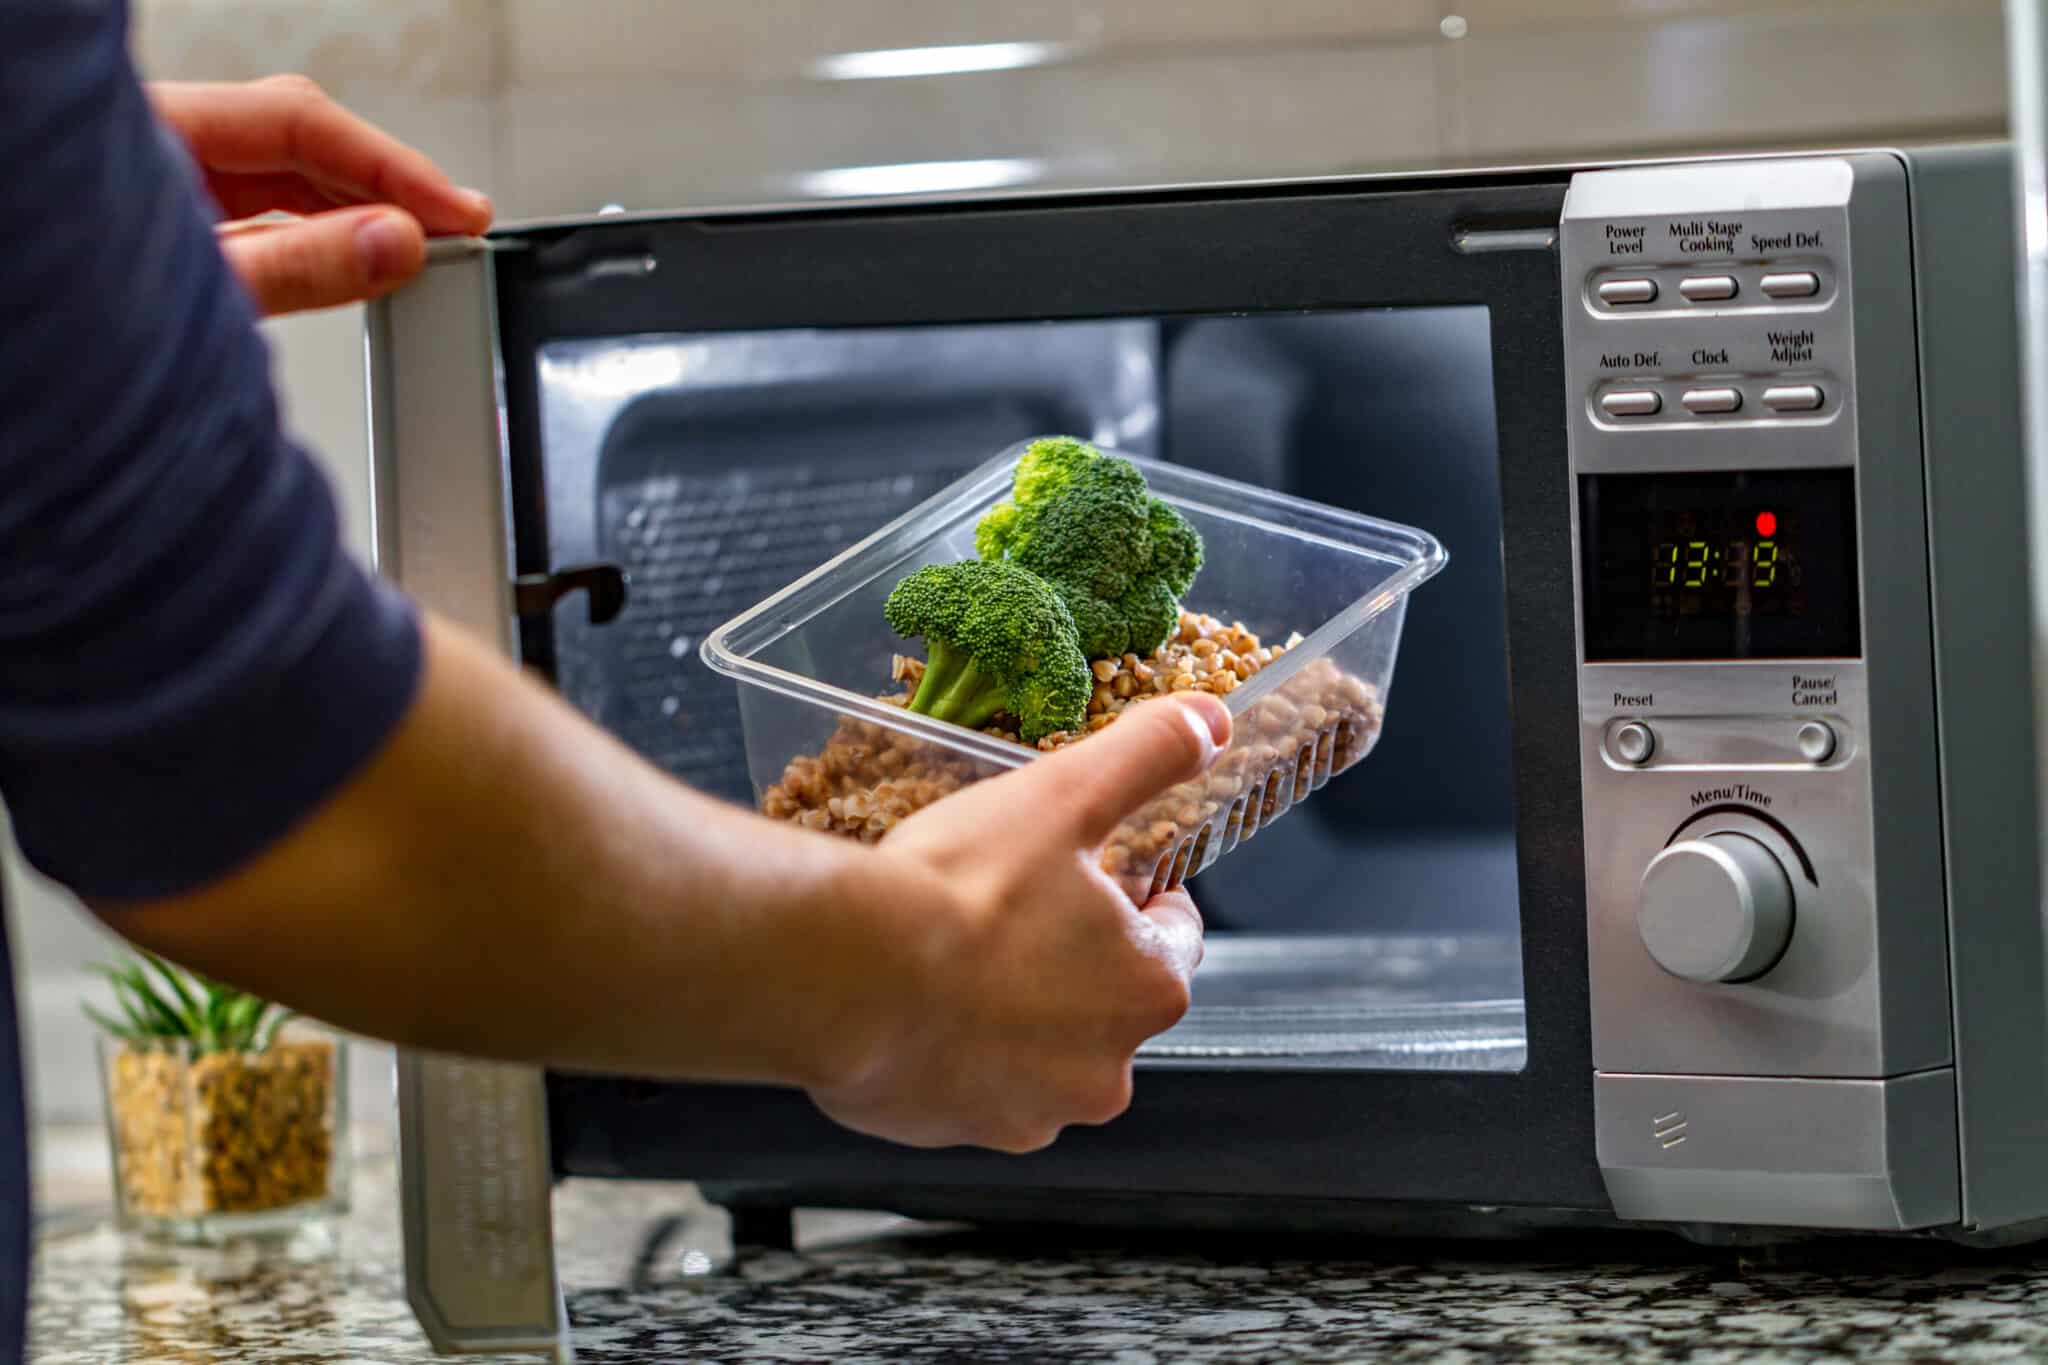 Using the Microwave to heat food